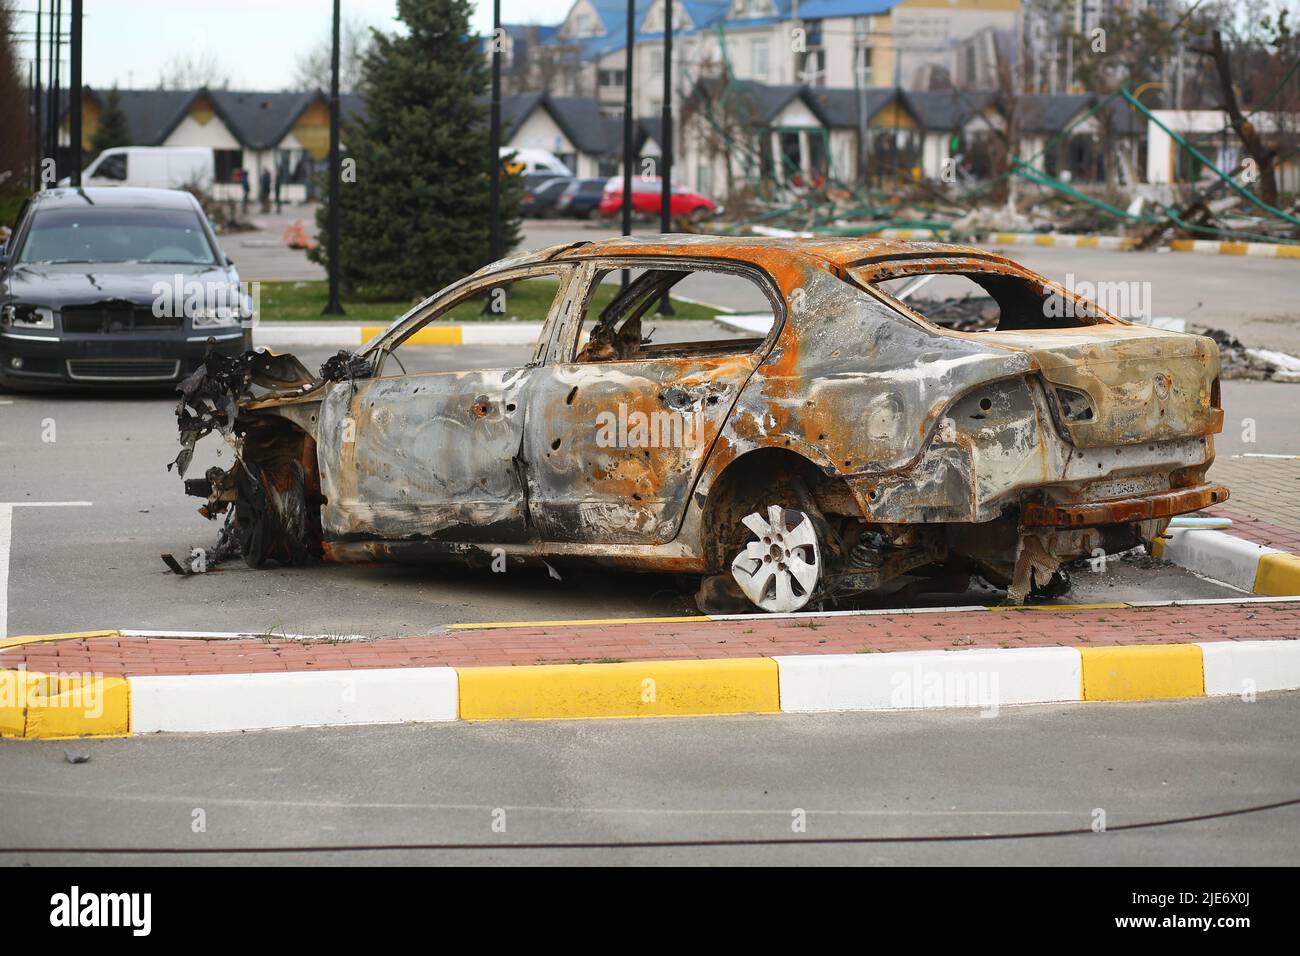 Bucha, Ukraine - April 12, 2022: Cars smashed and burnt by the russian army tanks in the streets of Bucha town during its occupation Stock Photo